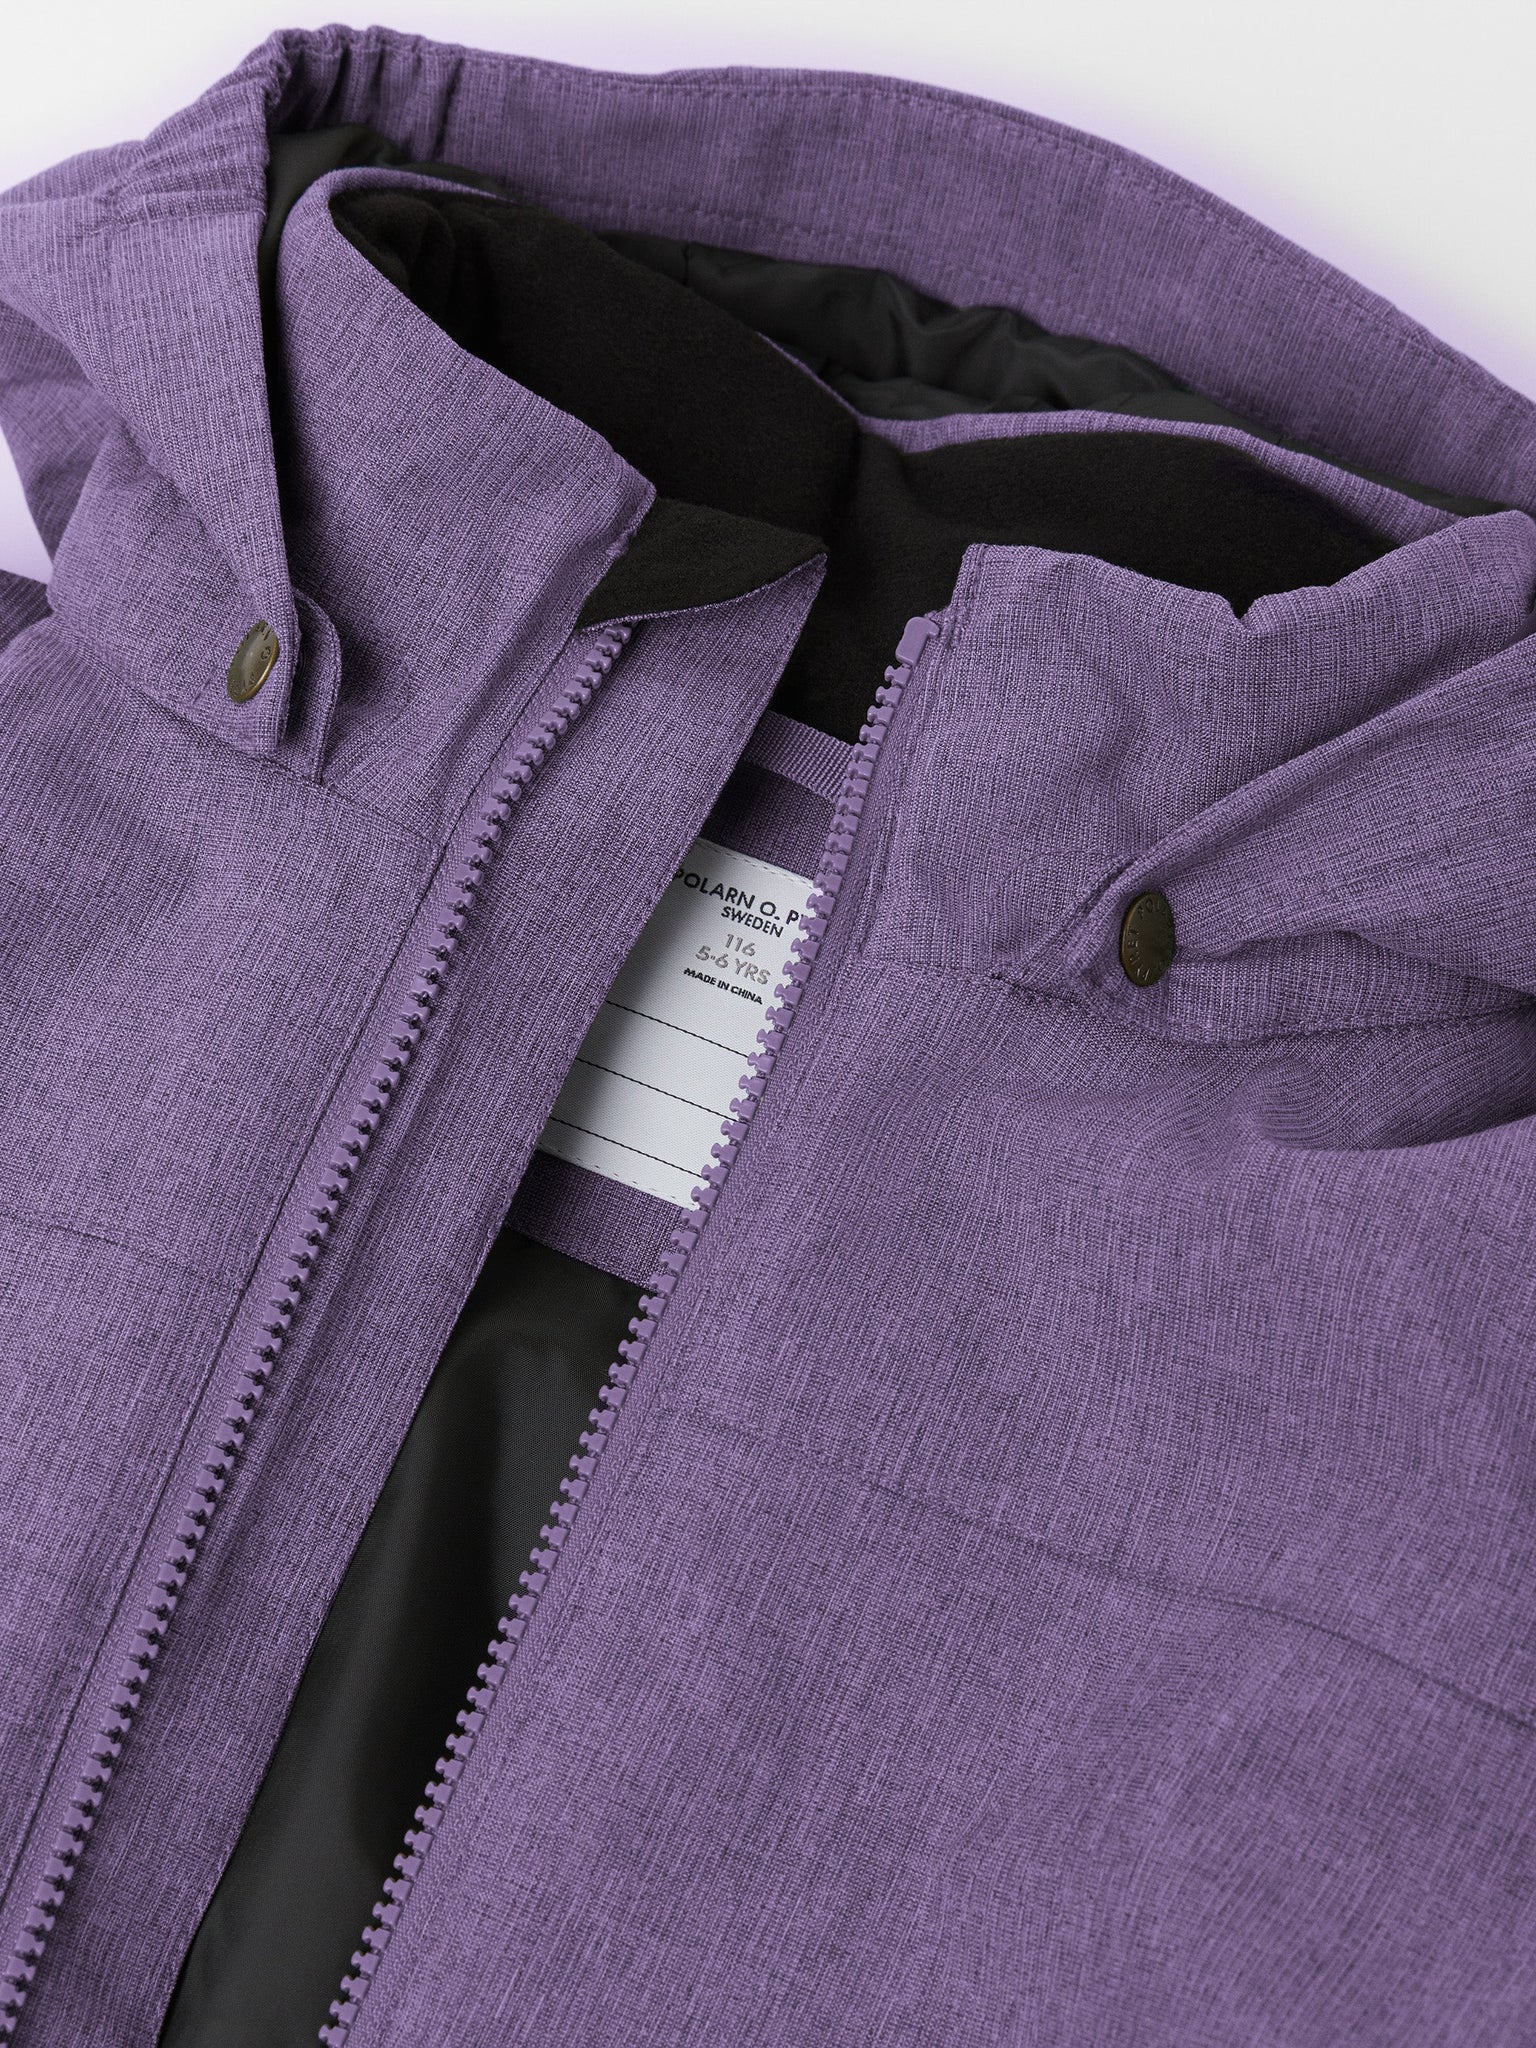 Purple Kids Padded Waterproof Coat from the Polarn O. Pyret outerwear collection. Kids outerwear made from sustainably source materials